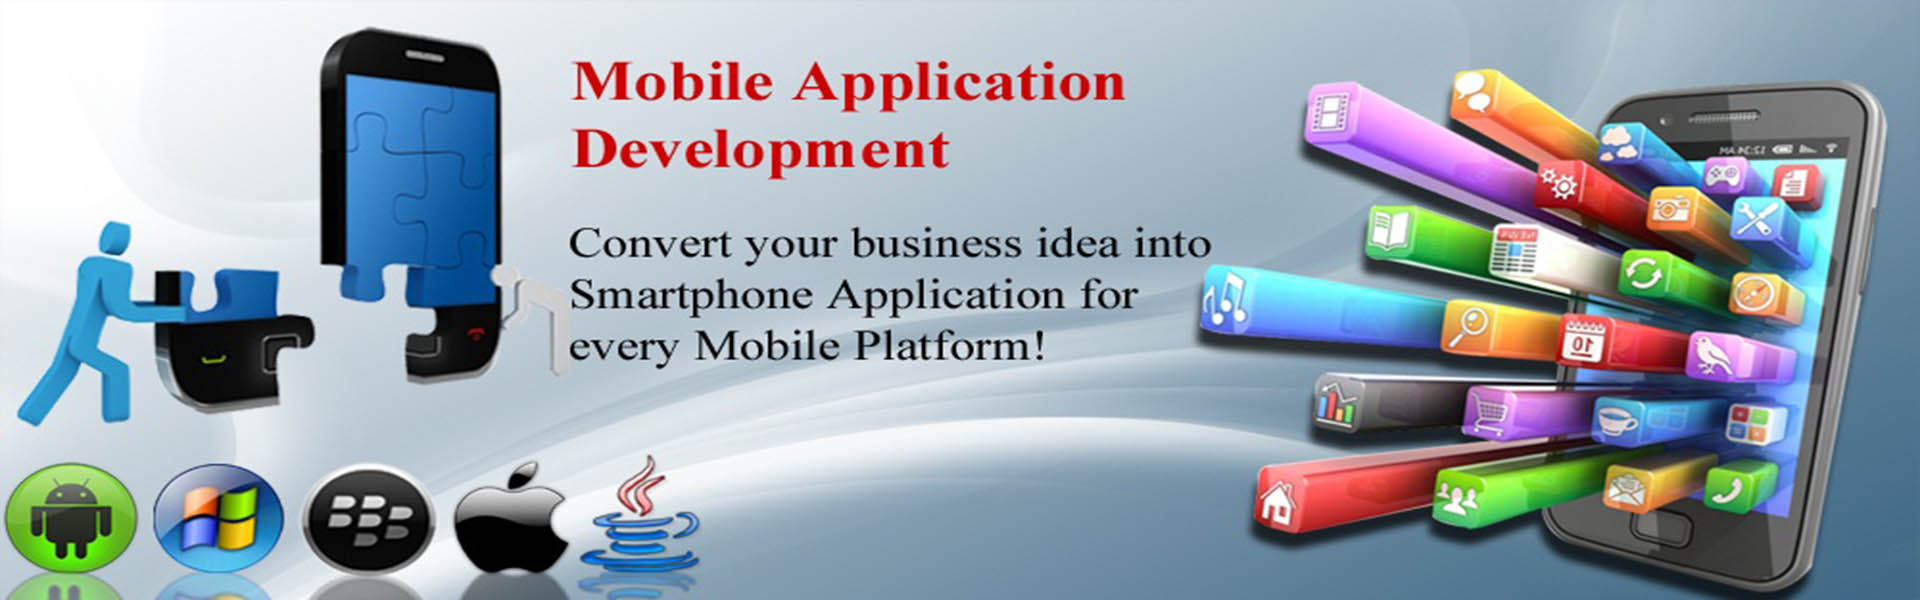 Types of Mobile Application